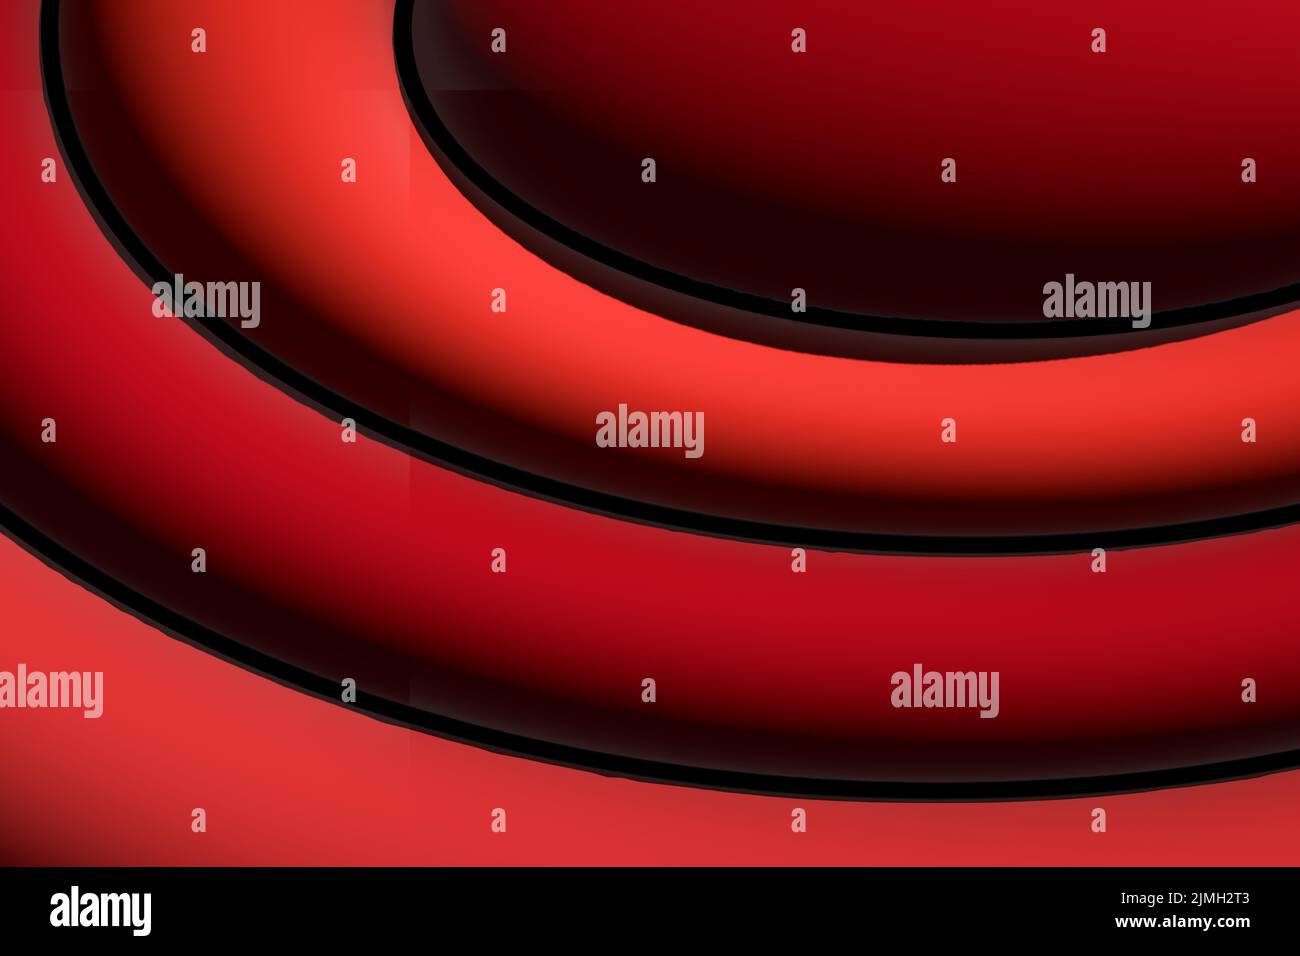 Abstract Red 3D Inflated Dented Shapes Background Stock Photo